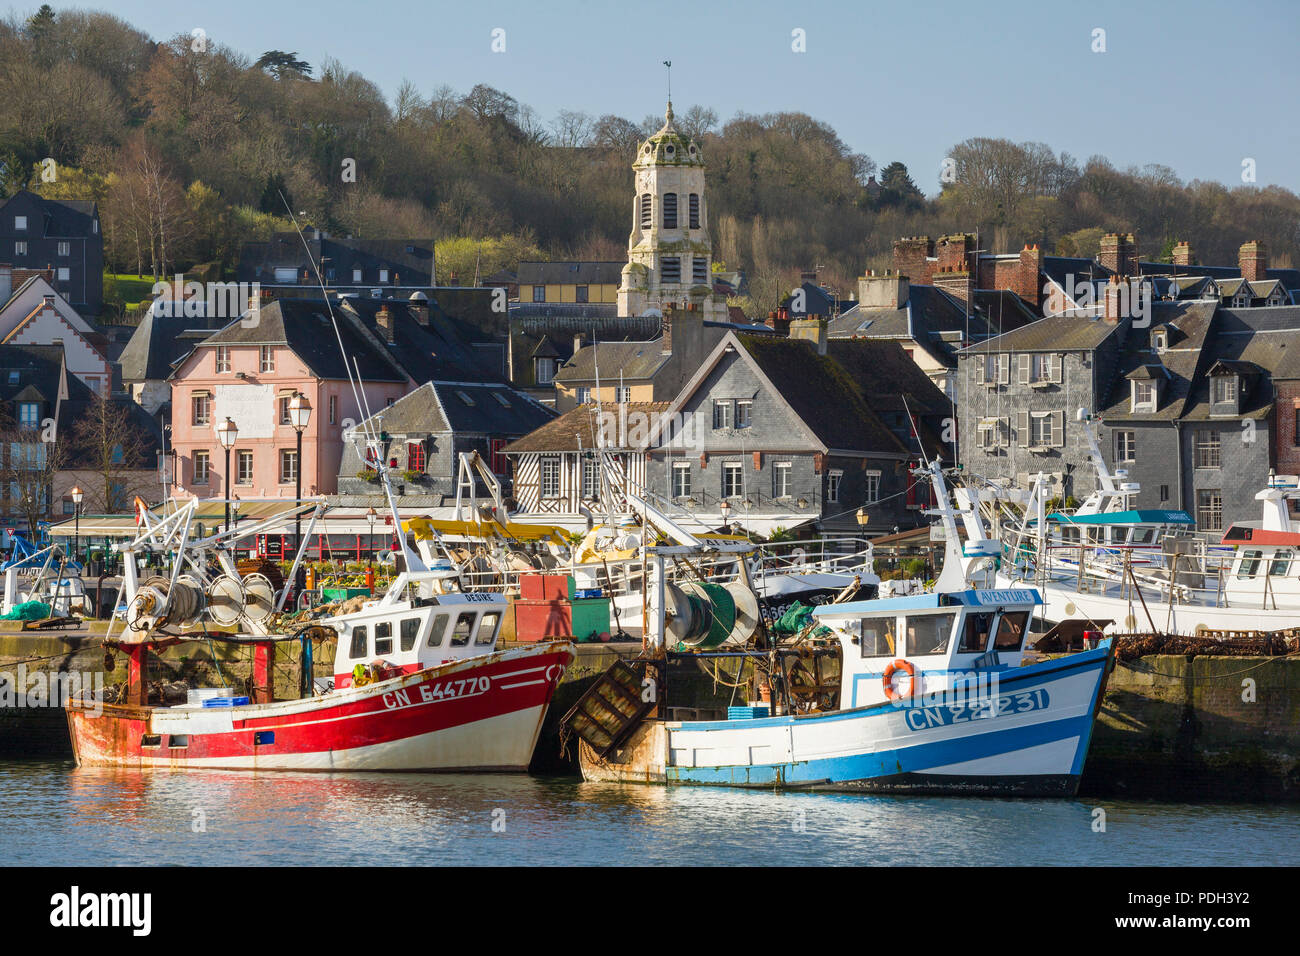 Two colourful fishing boats moored on the quayside with the St. Leonard's Church behind, Honfleur, Normandy, France Stock Photo